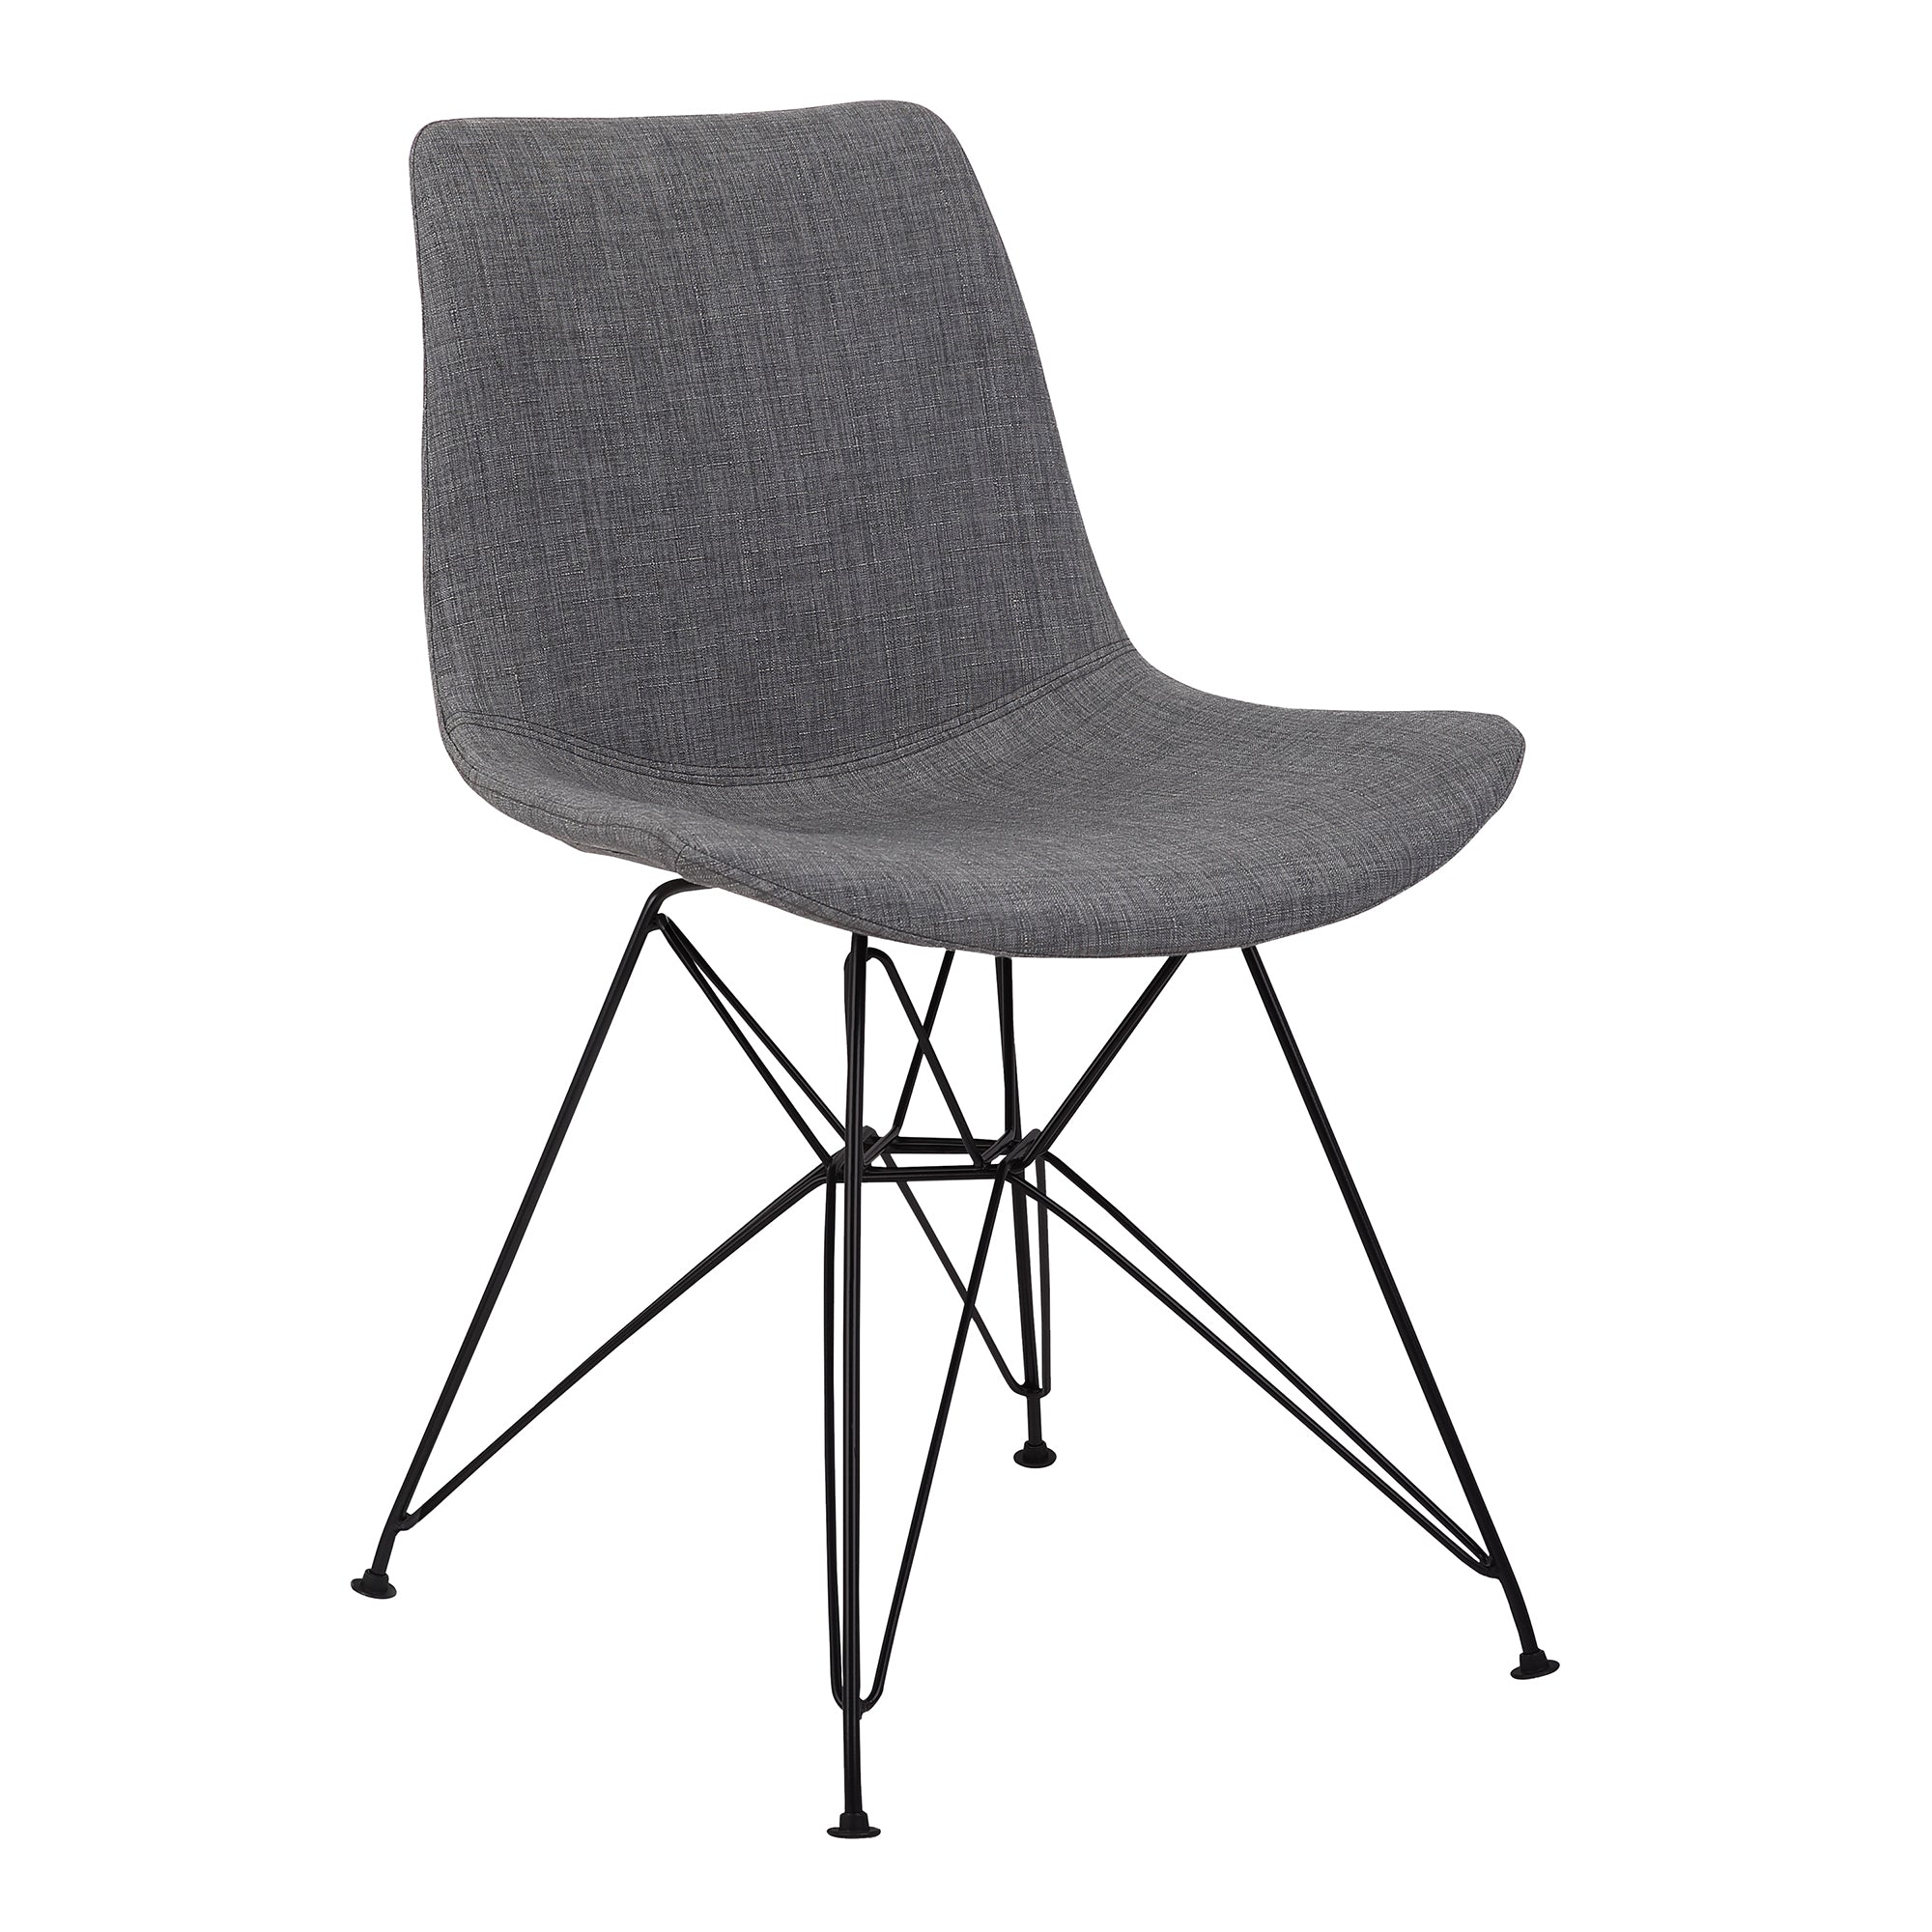 Armen Living Lcplchblch Palmetto Contemporary Dining Chair In Charcoal Fabric With Black Metal Legs